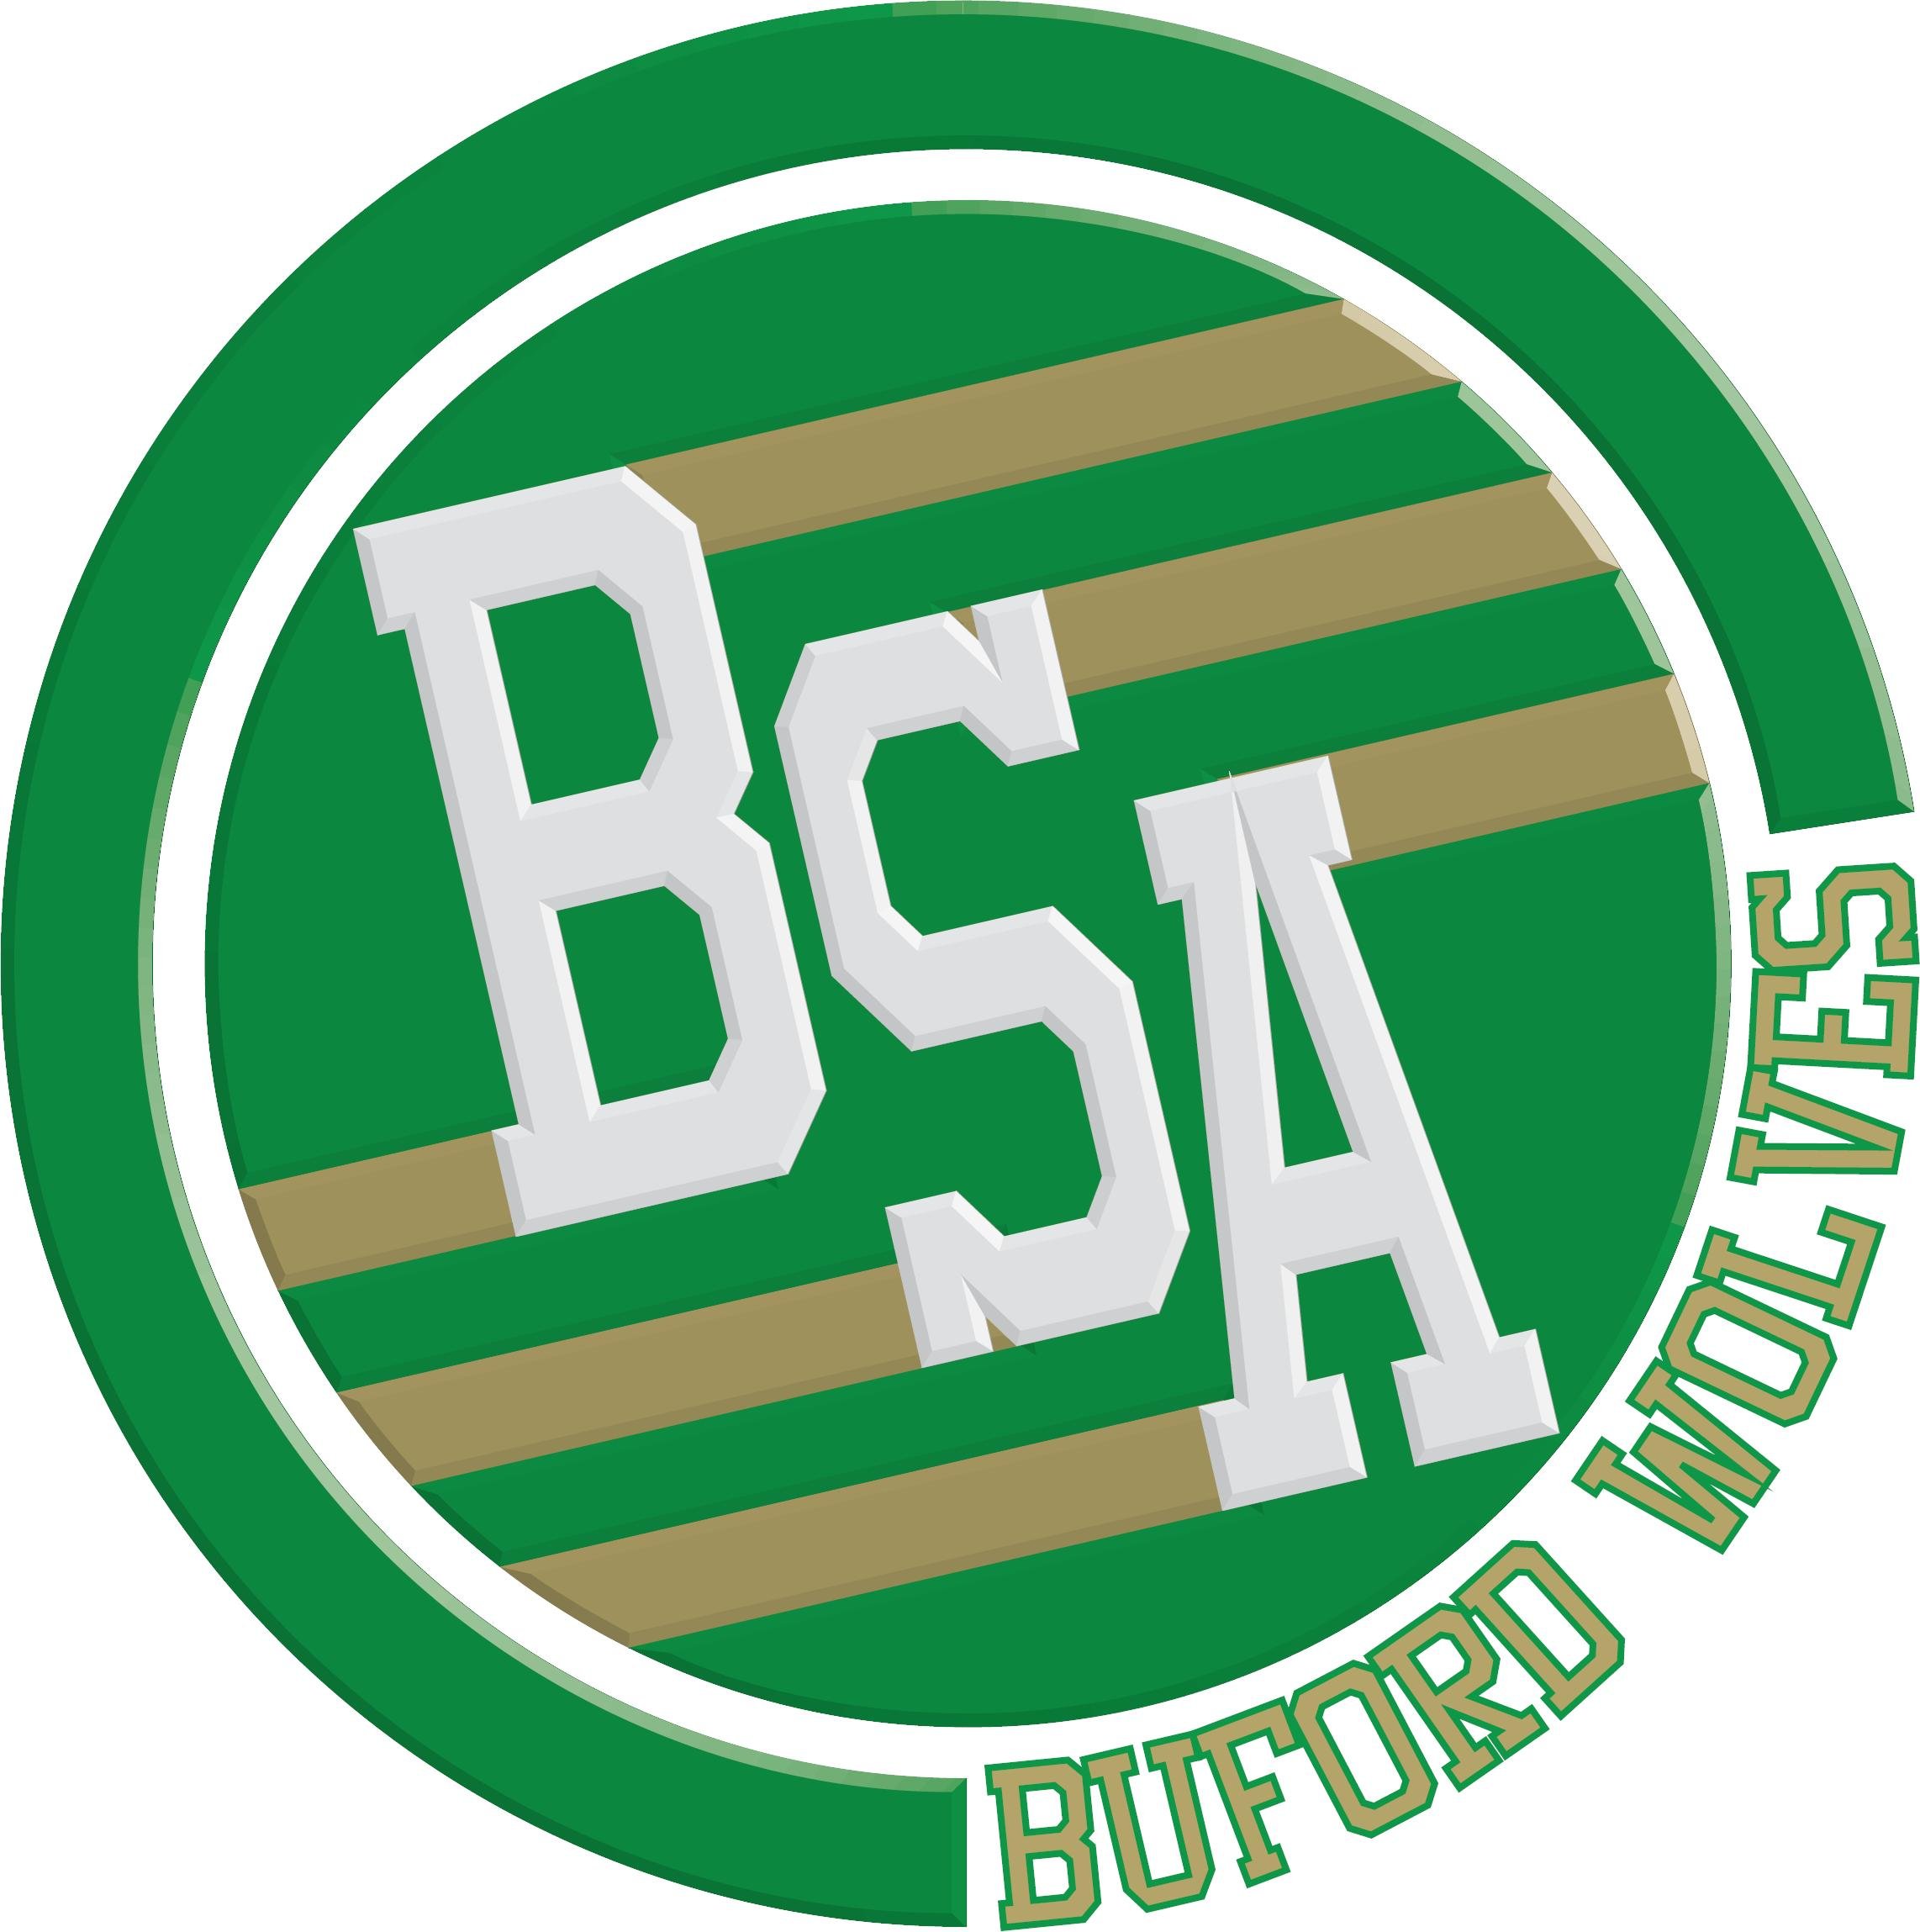 We are proudly serving the 4th & 5th Grade Students of Buford, Georgia. At Buford Senior Academy it is our mission to Build Student Achievement. #BSA